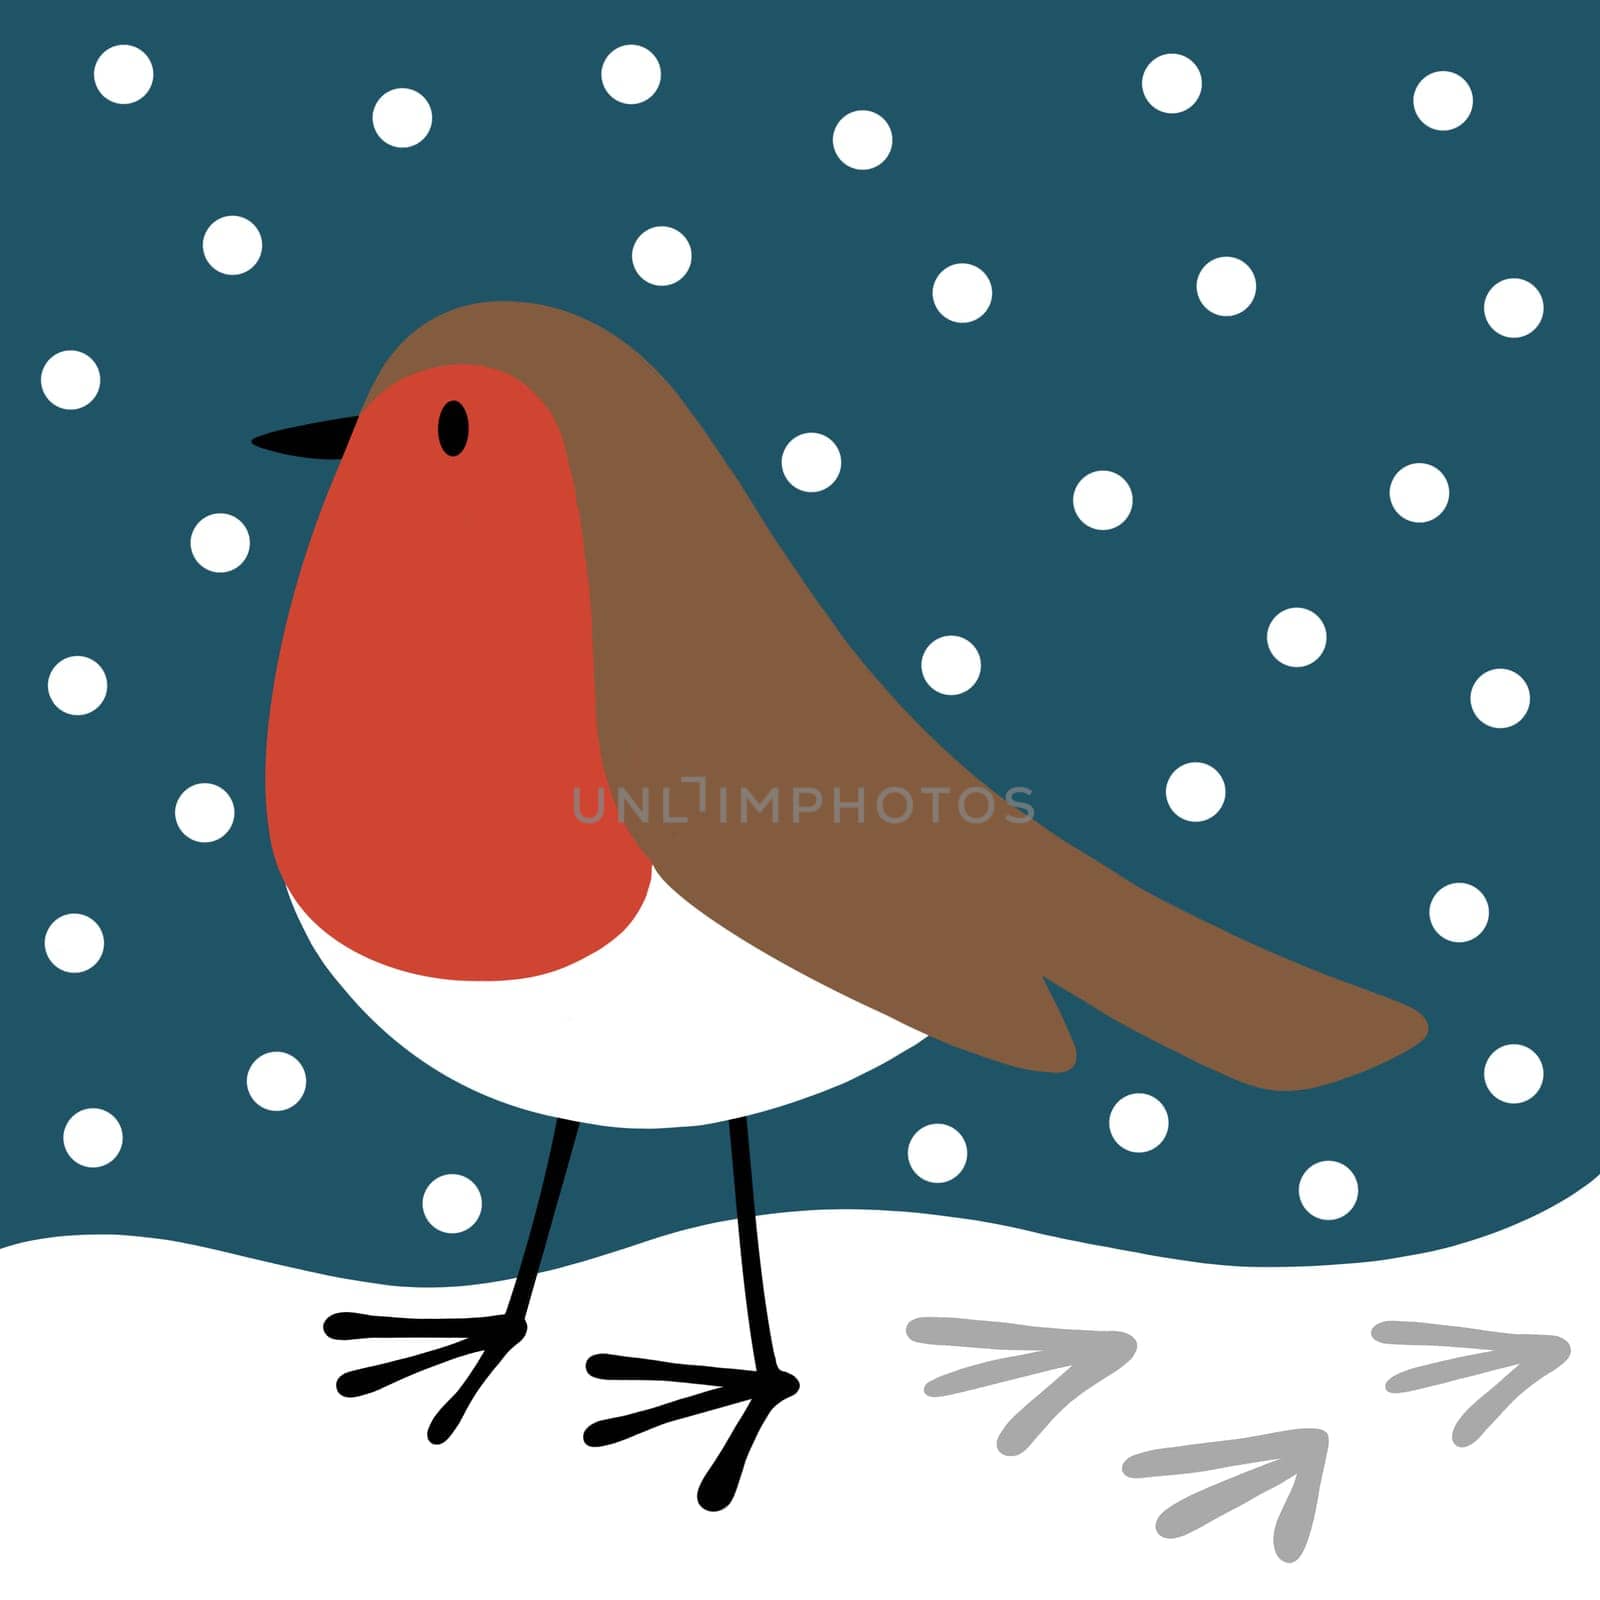 Cute cartoon robin in the snow. A cute Christmas image on a cold day. The bird is lwalking and leaving tiny footprints in the snow. Xmas fun in the snow. A simple contemporary festive design.